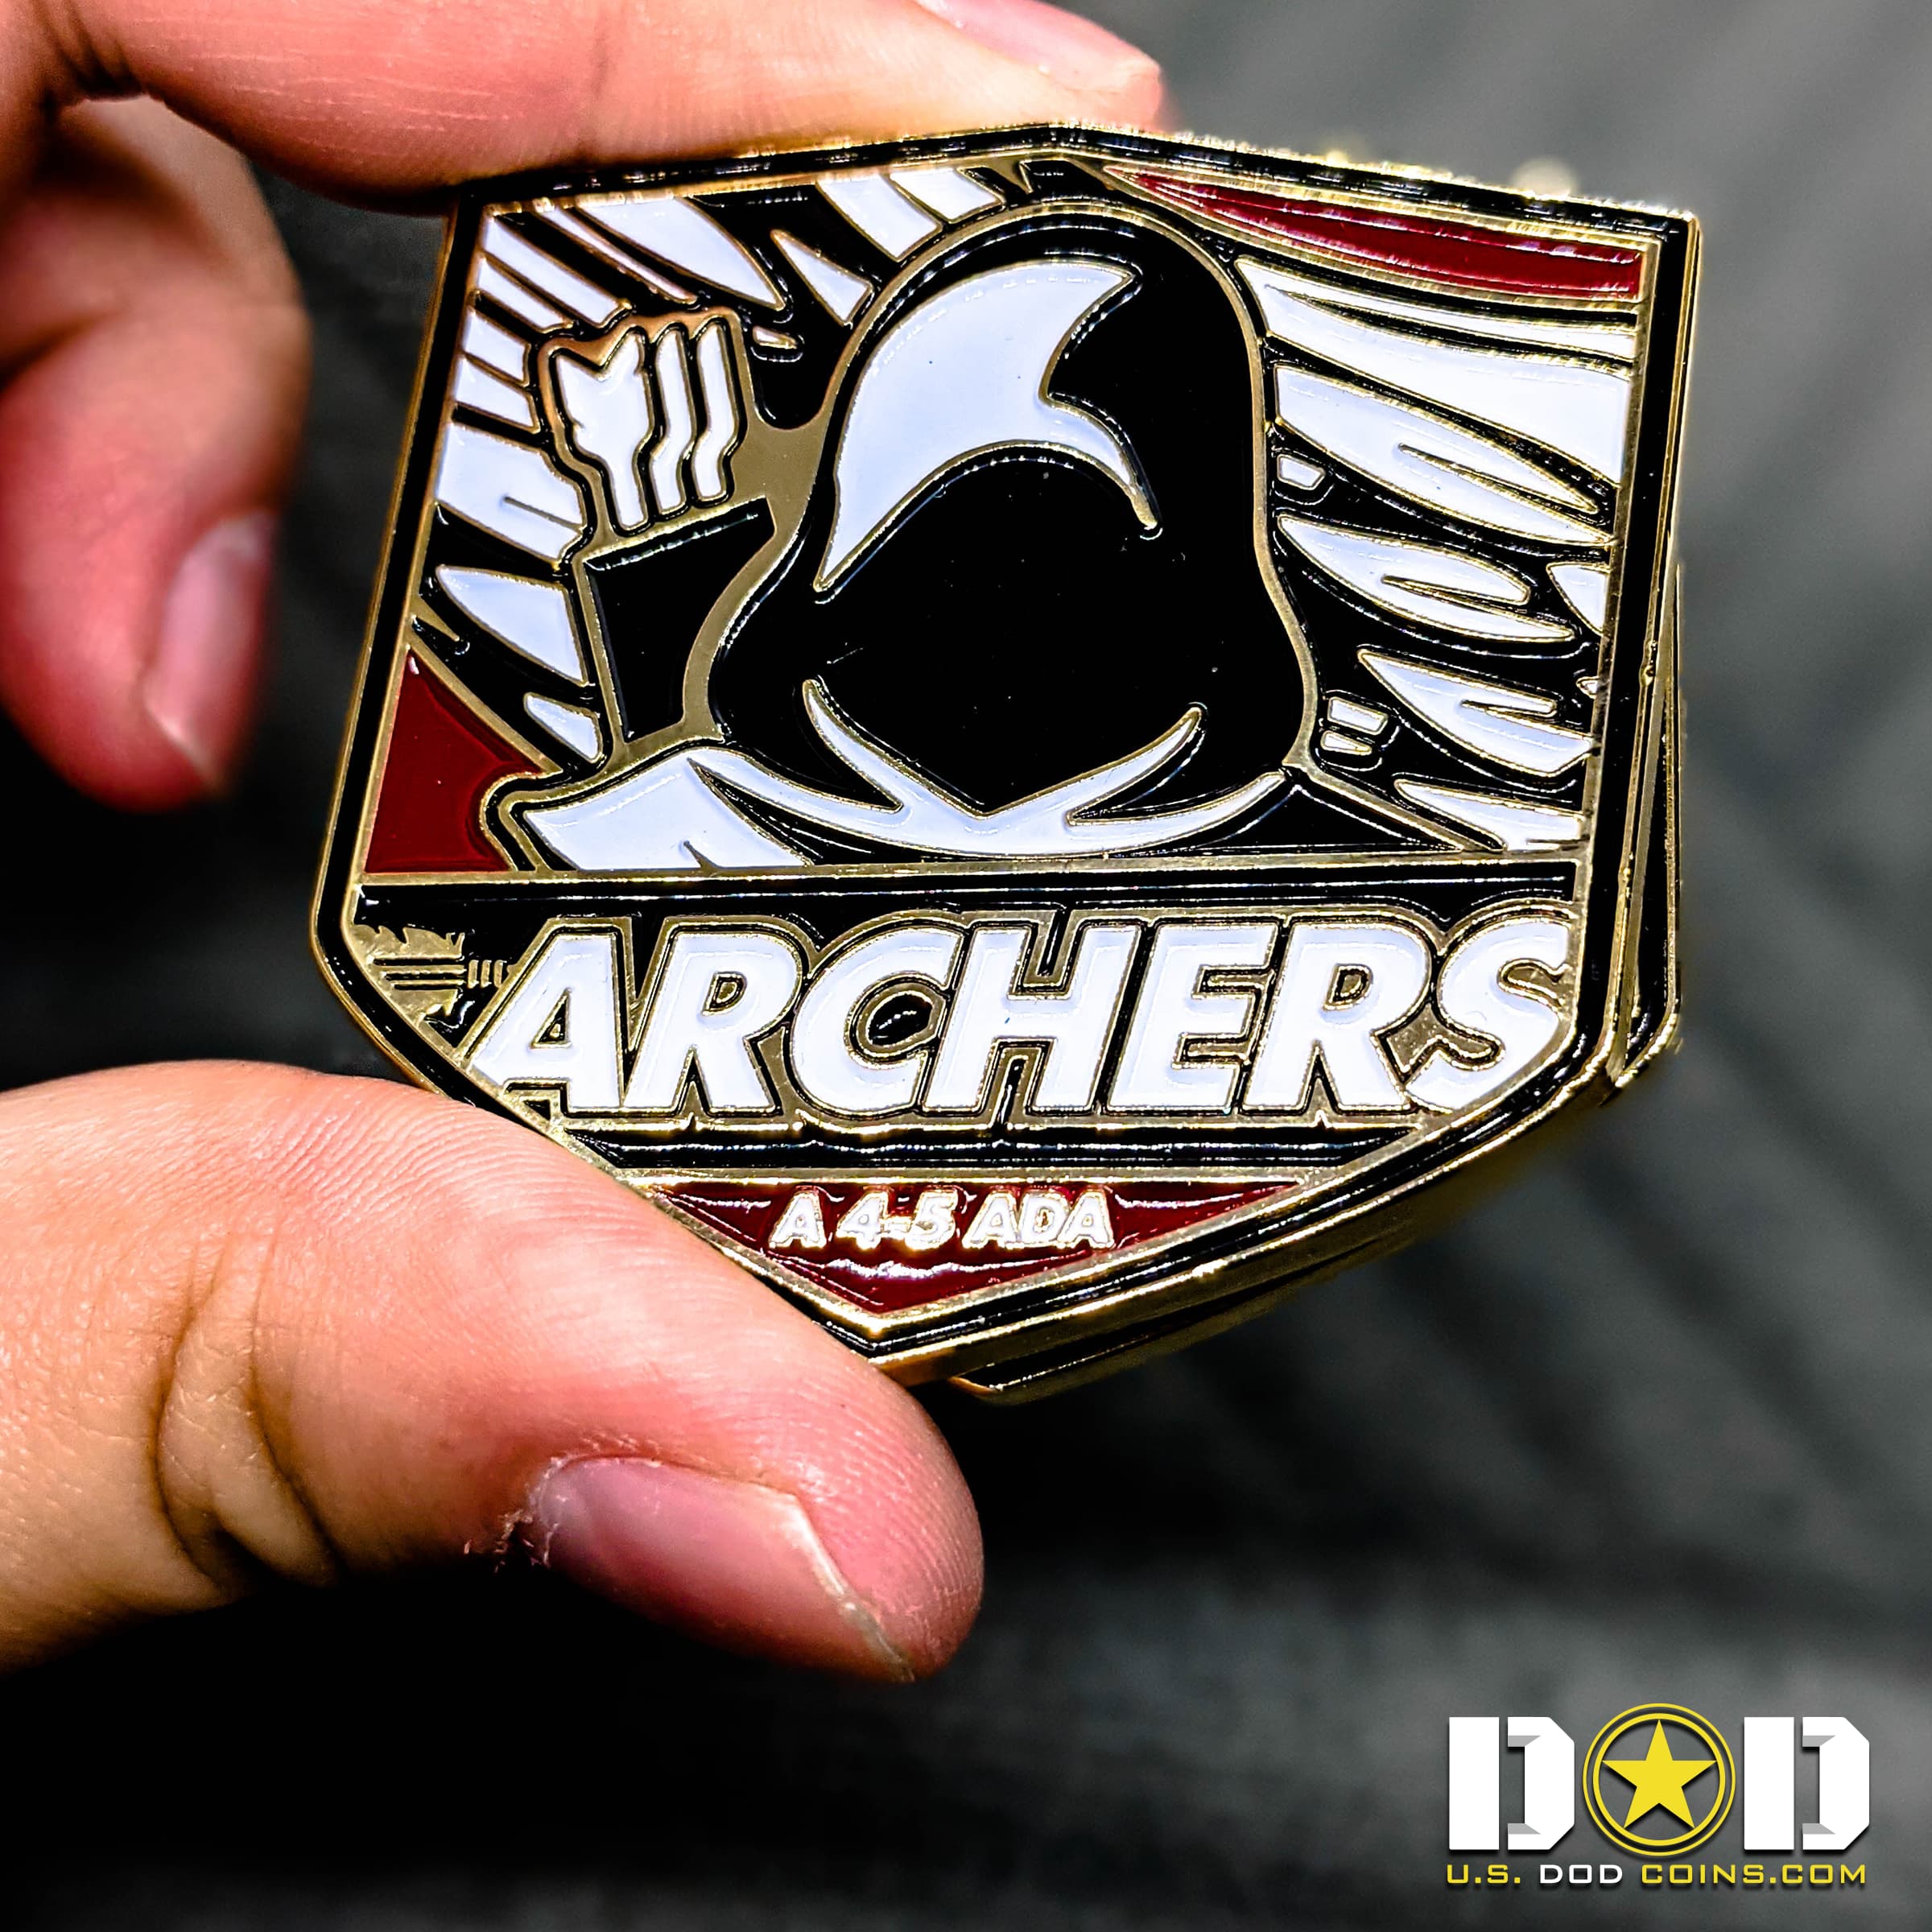 Archers-A-4-5-ADA-Challenge-Coin_0001_USDODCoins-Challenge-Coins-Examples-79